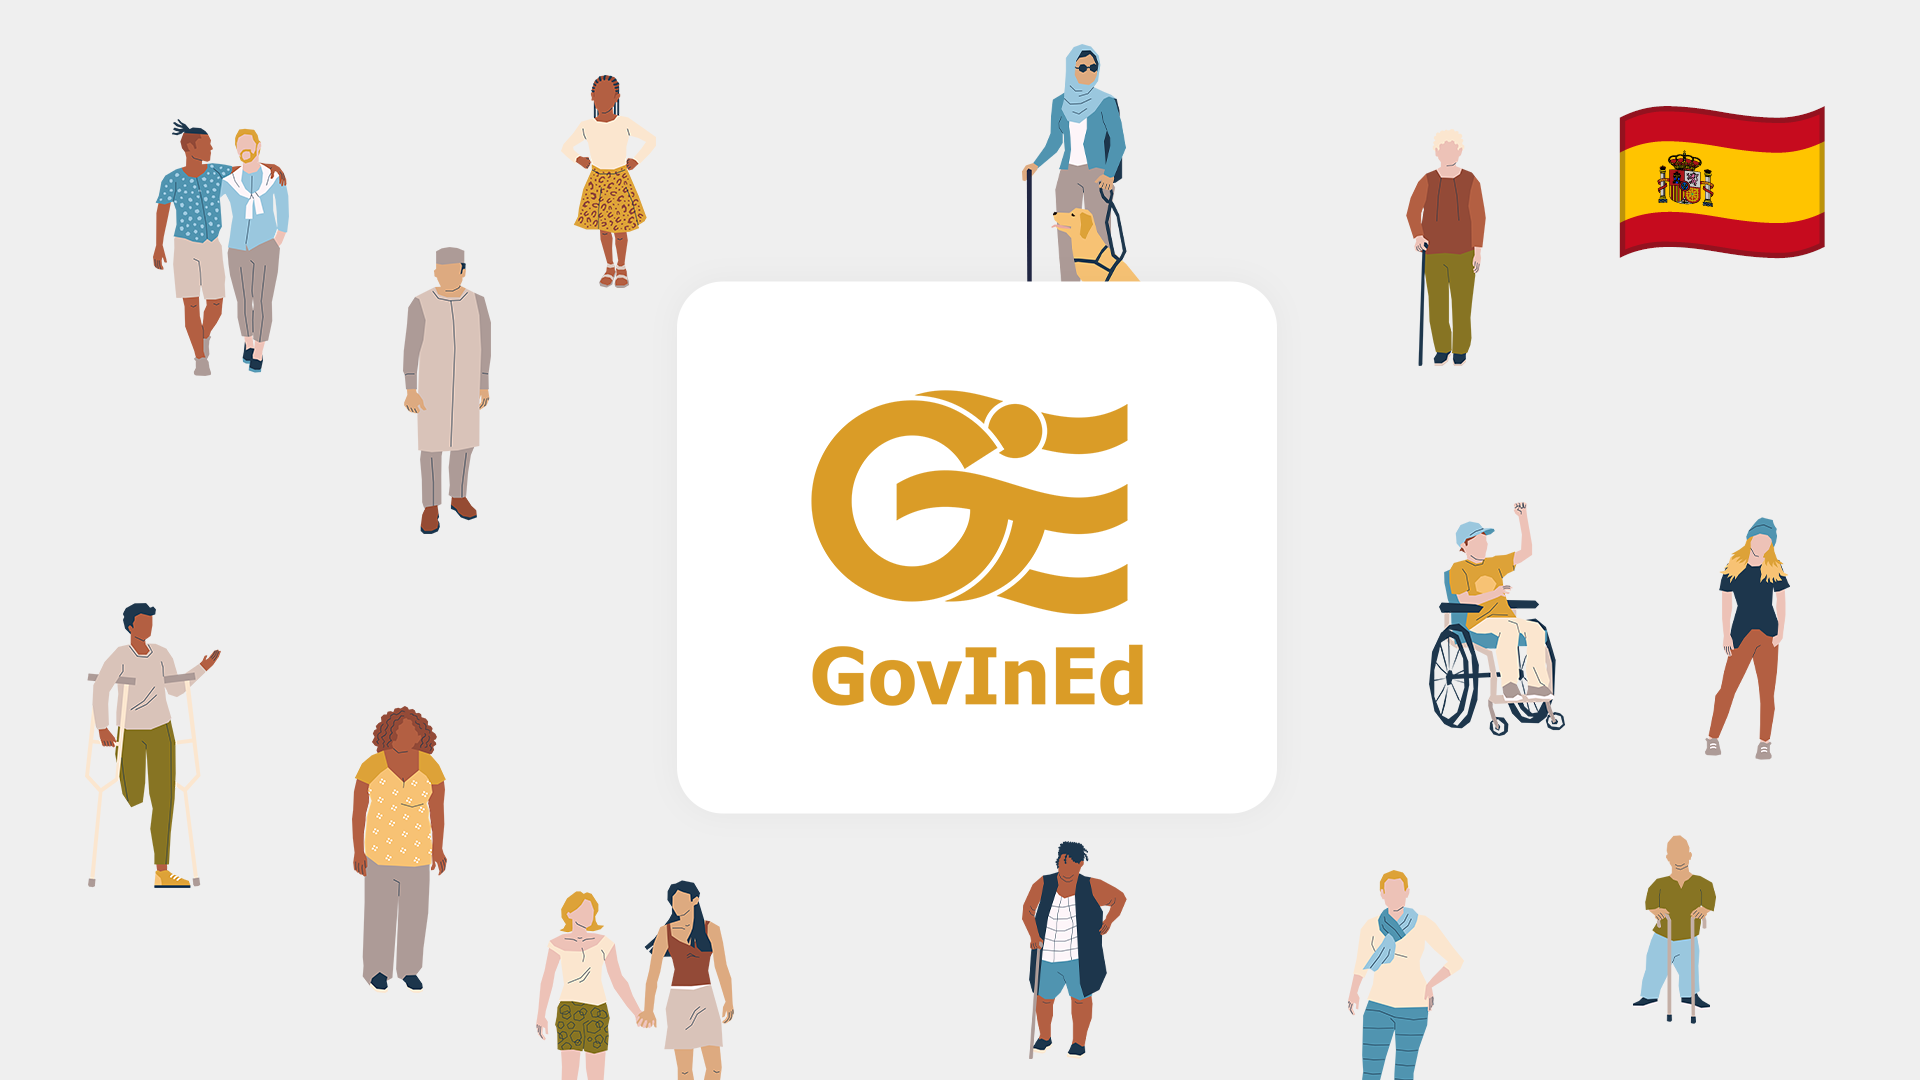 An illustration titled "GovInEd" shows diverse individuals around the logo. A spanish flag is in the top right corner to symbolize that this is the catalanian version of the course